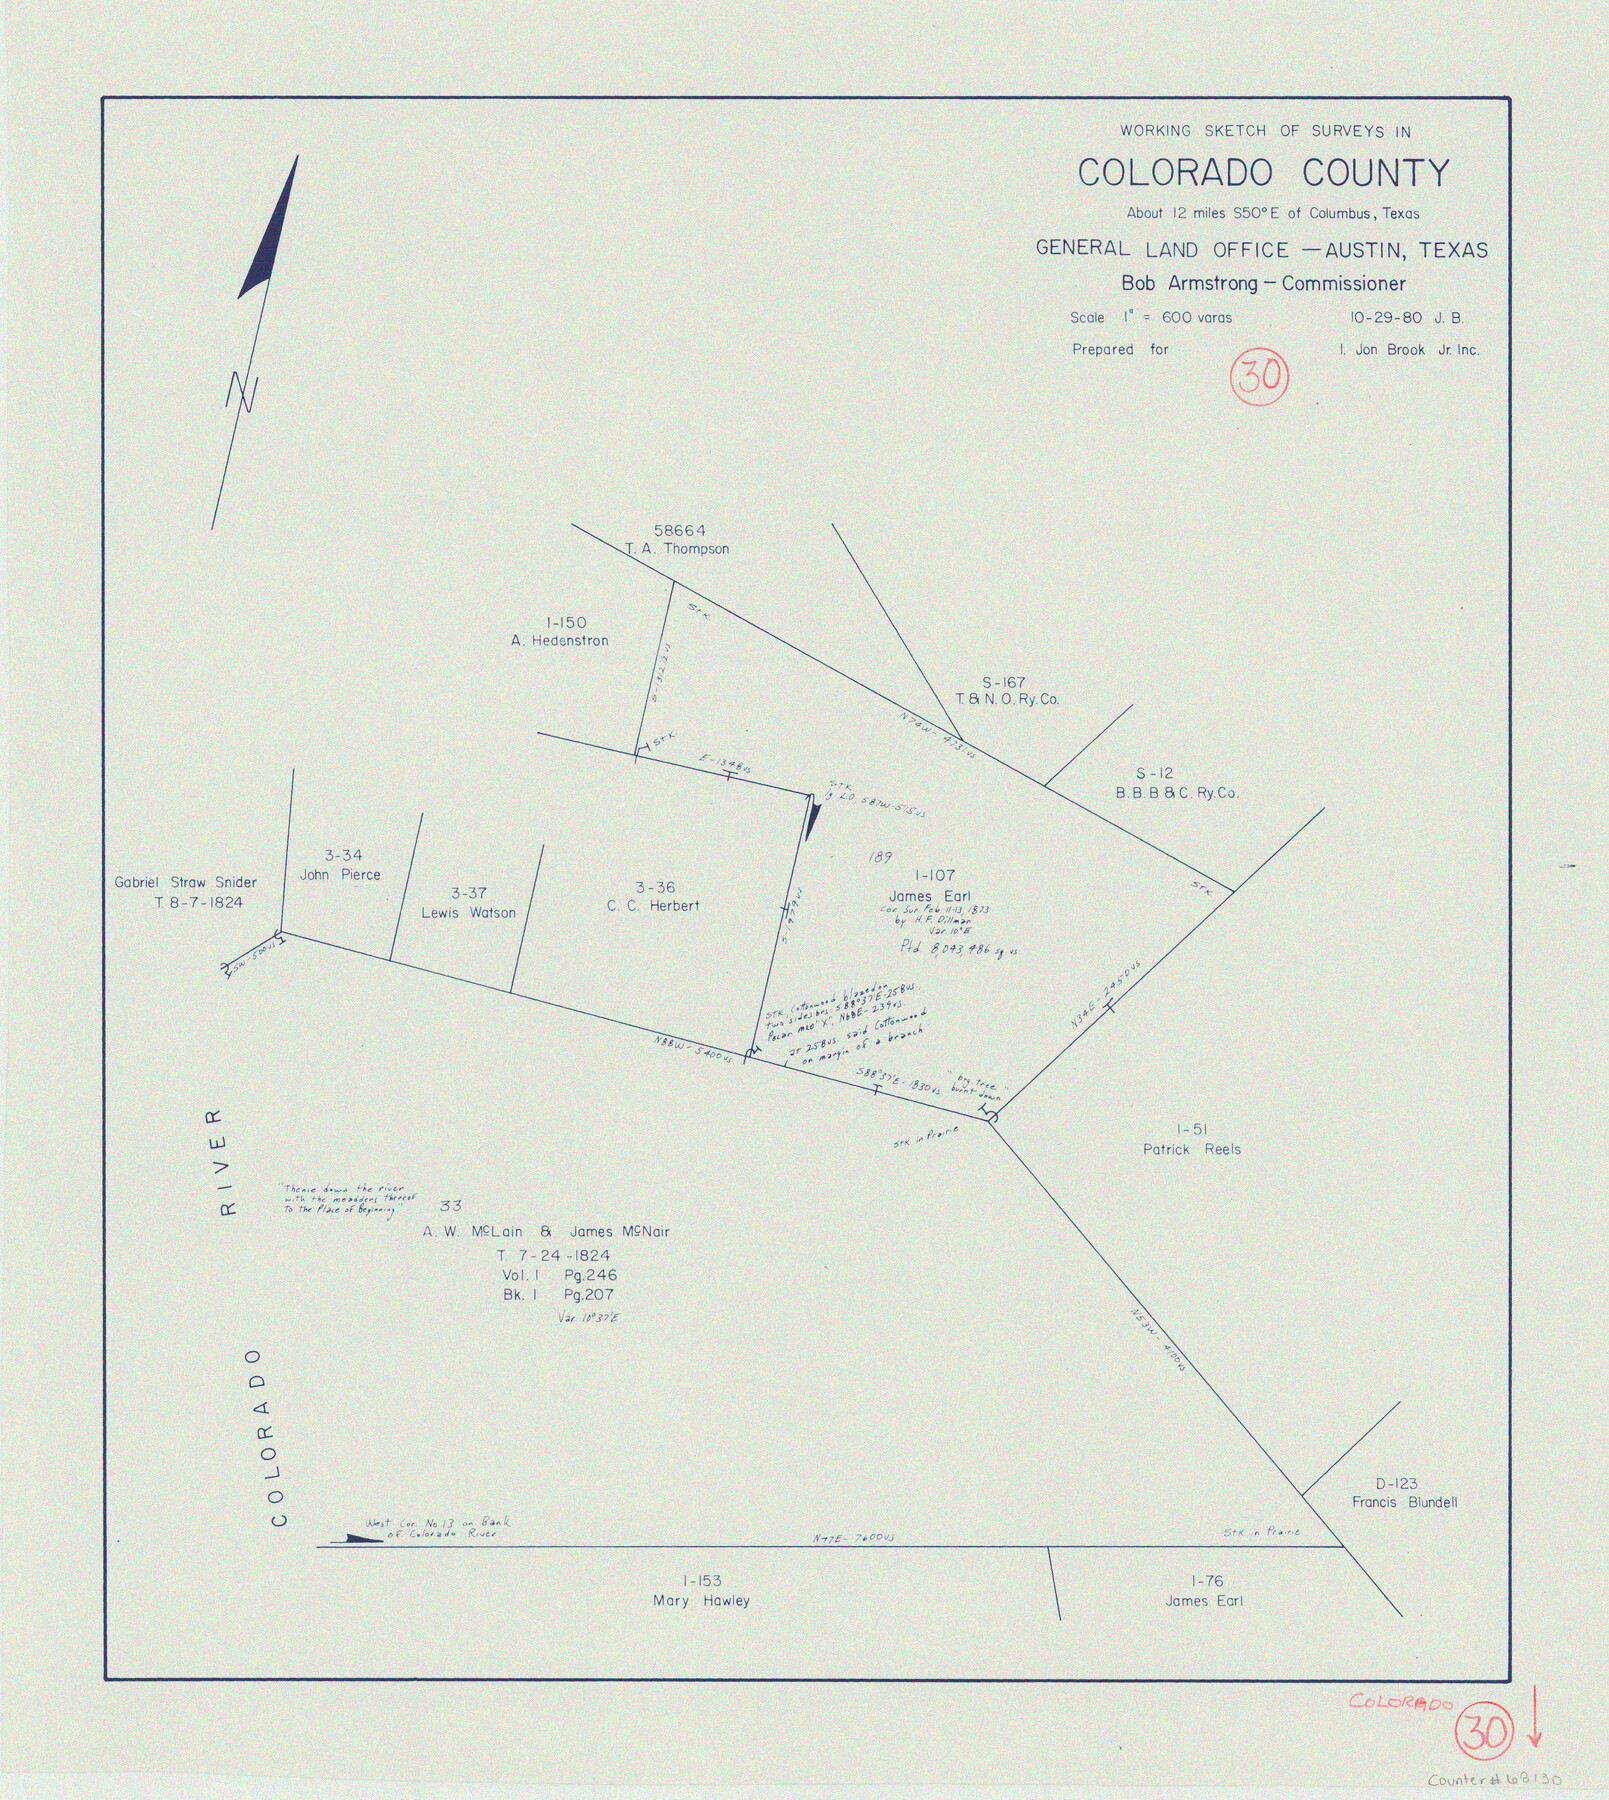 68130, Colorado County Working Sketch 30, General Map Collection